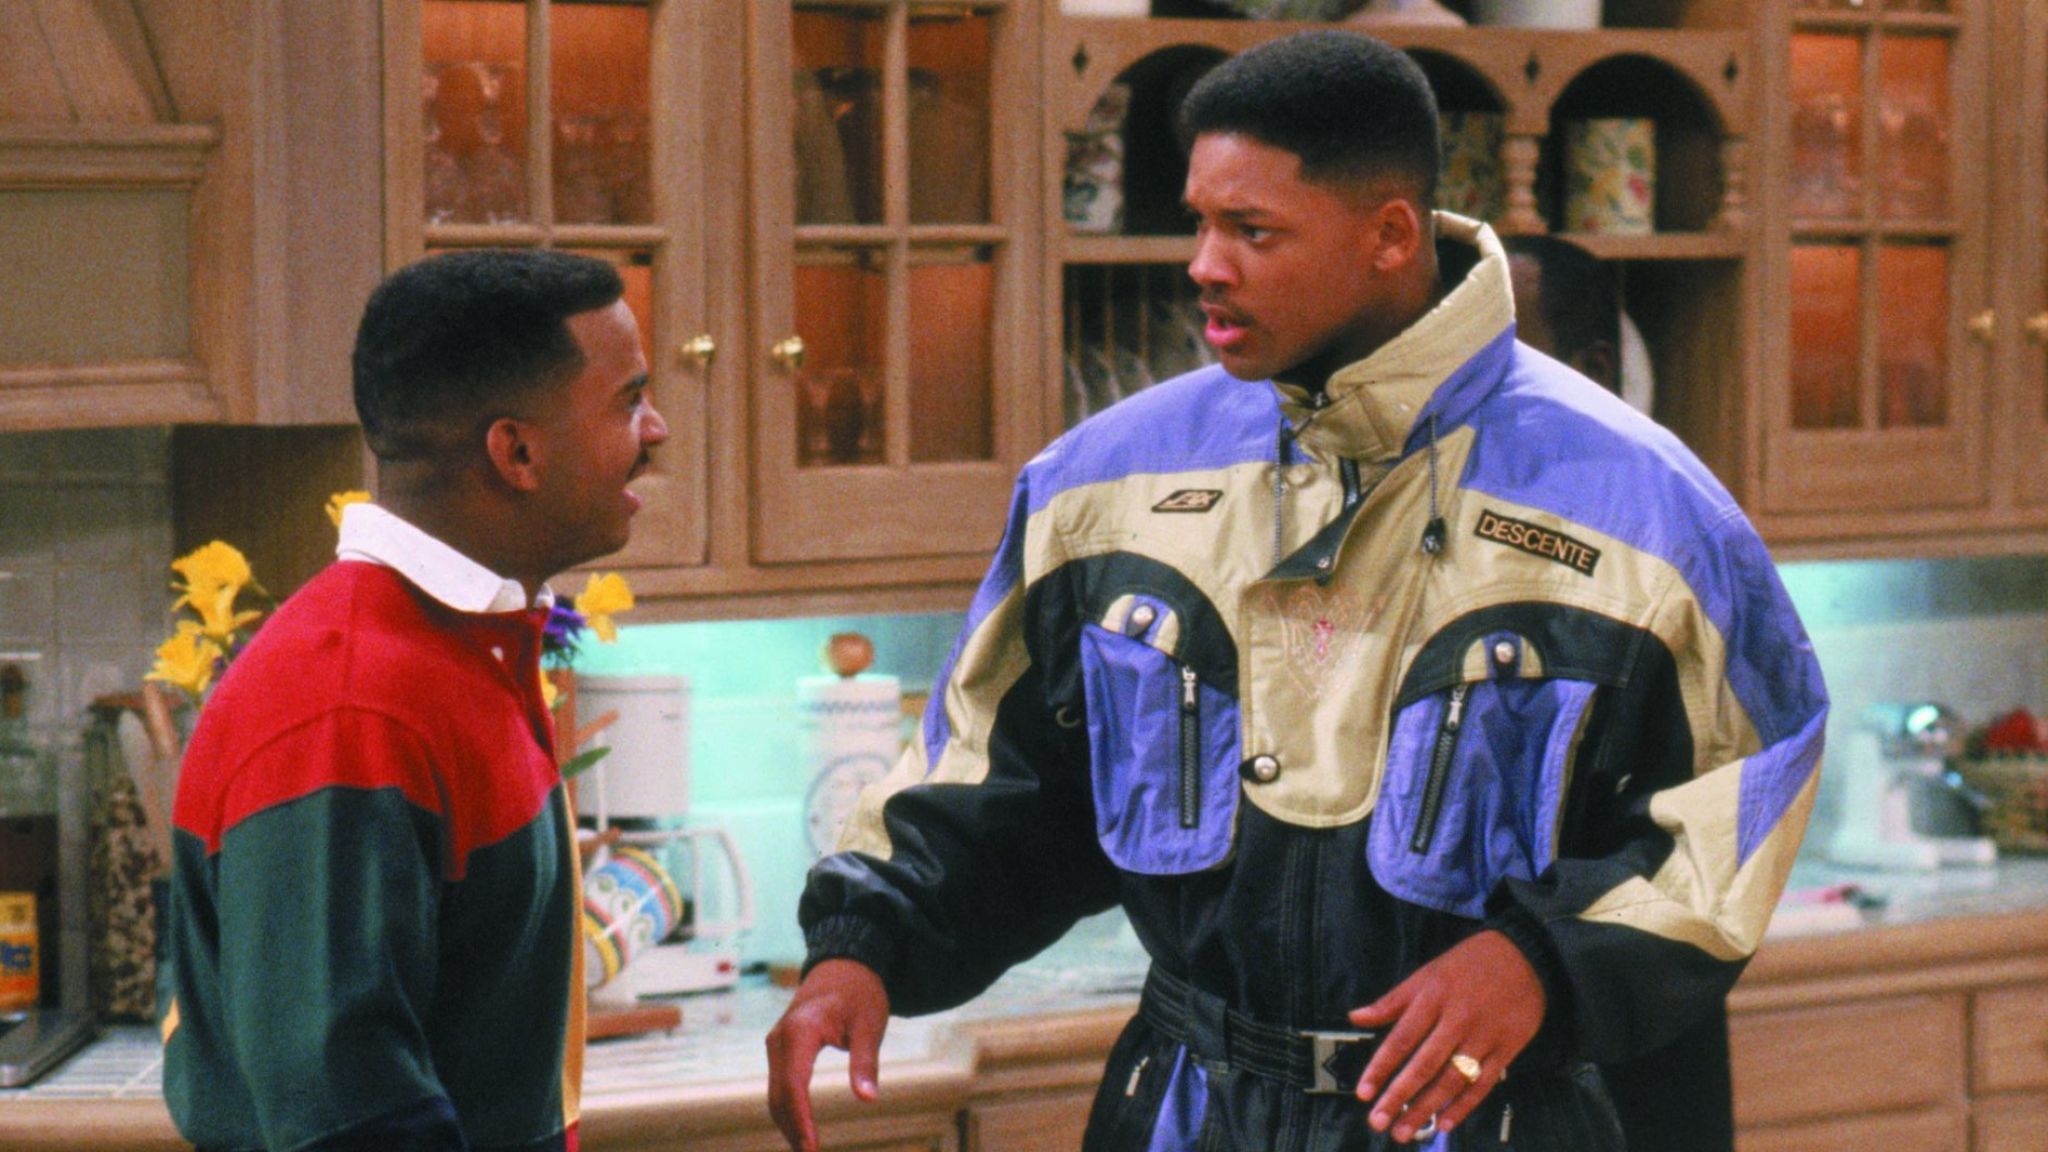 The Fresh Prince Of Bel Air - Fresh Prince Of Bel Air Outfits - HD Wallpaper 